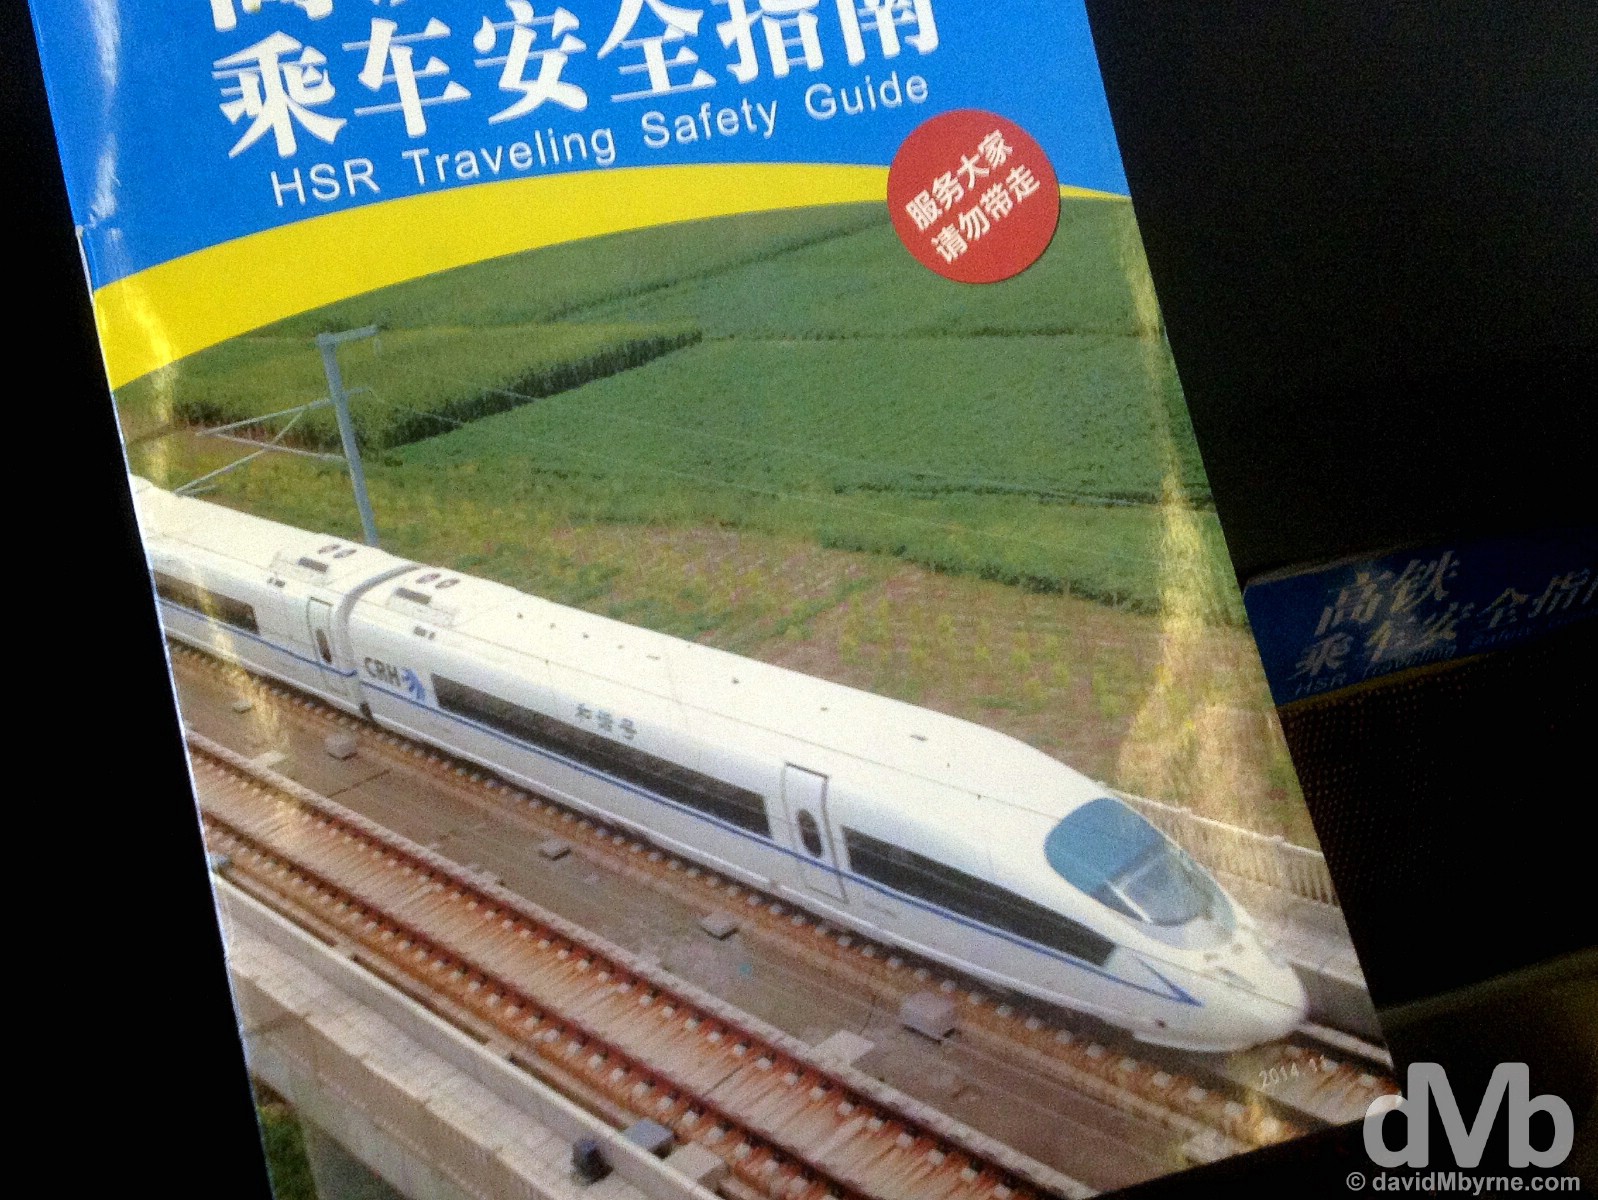 The HSR Travel Safety Guide on the D26 high-speed train en route from Harbin to Beijing, China. February 7, 2015.